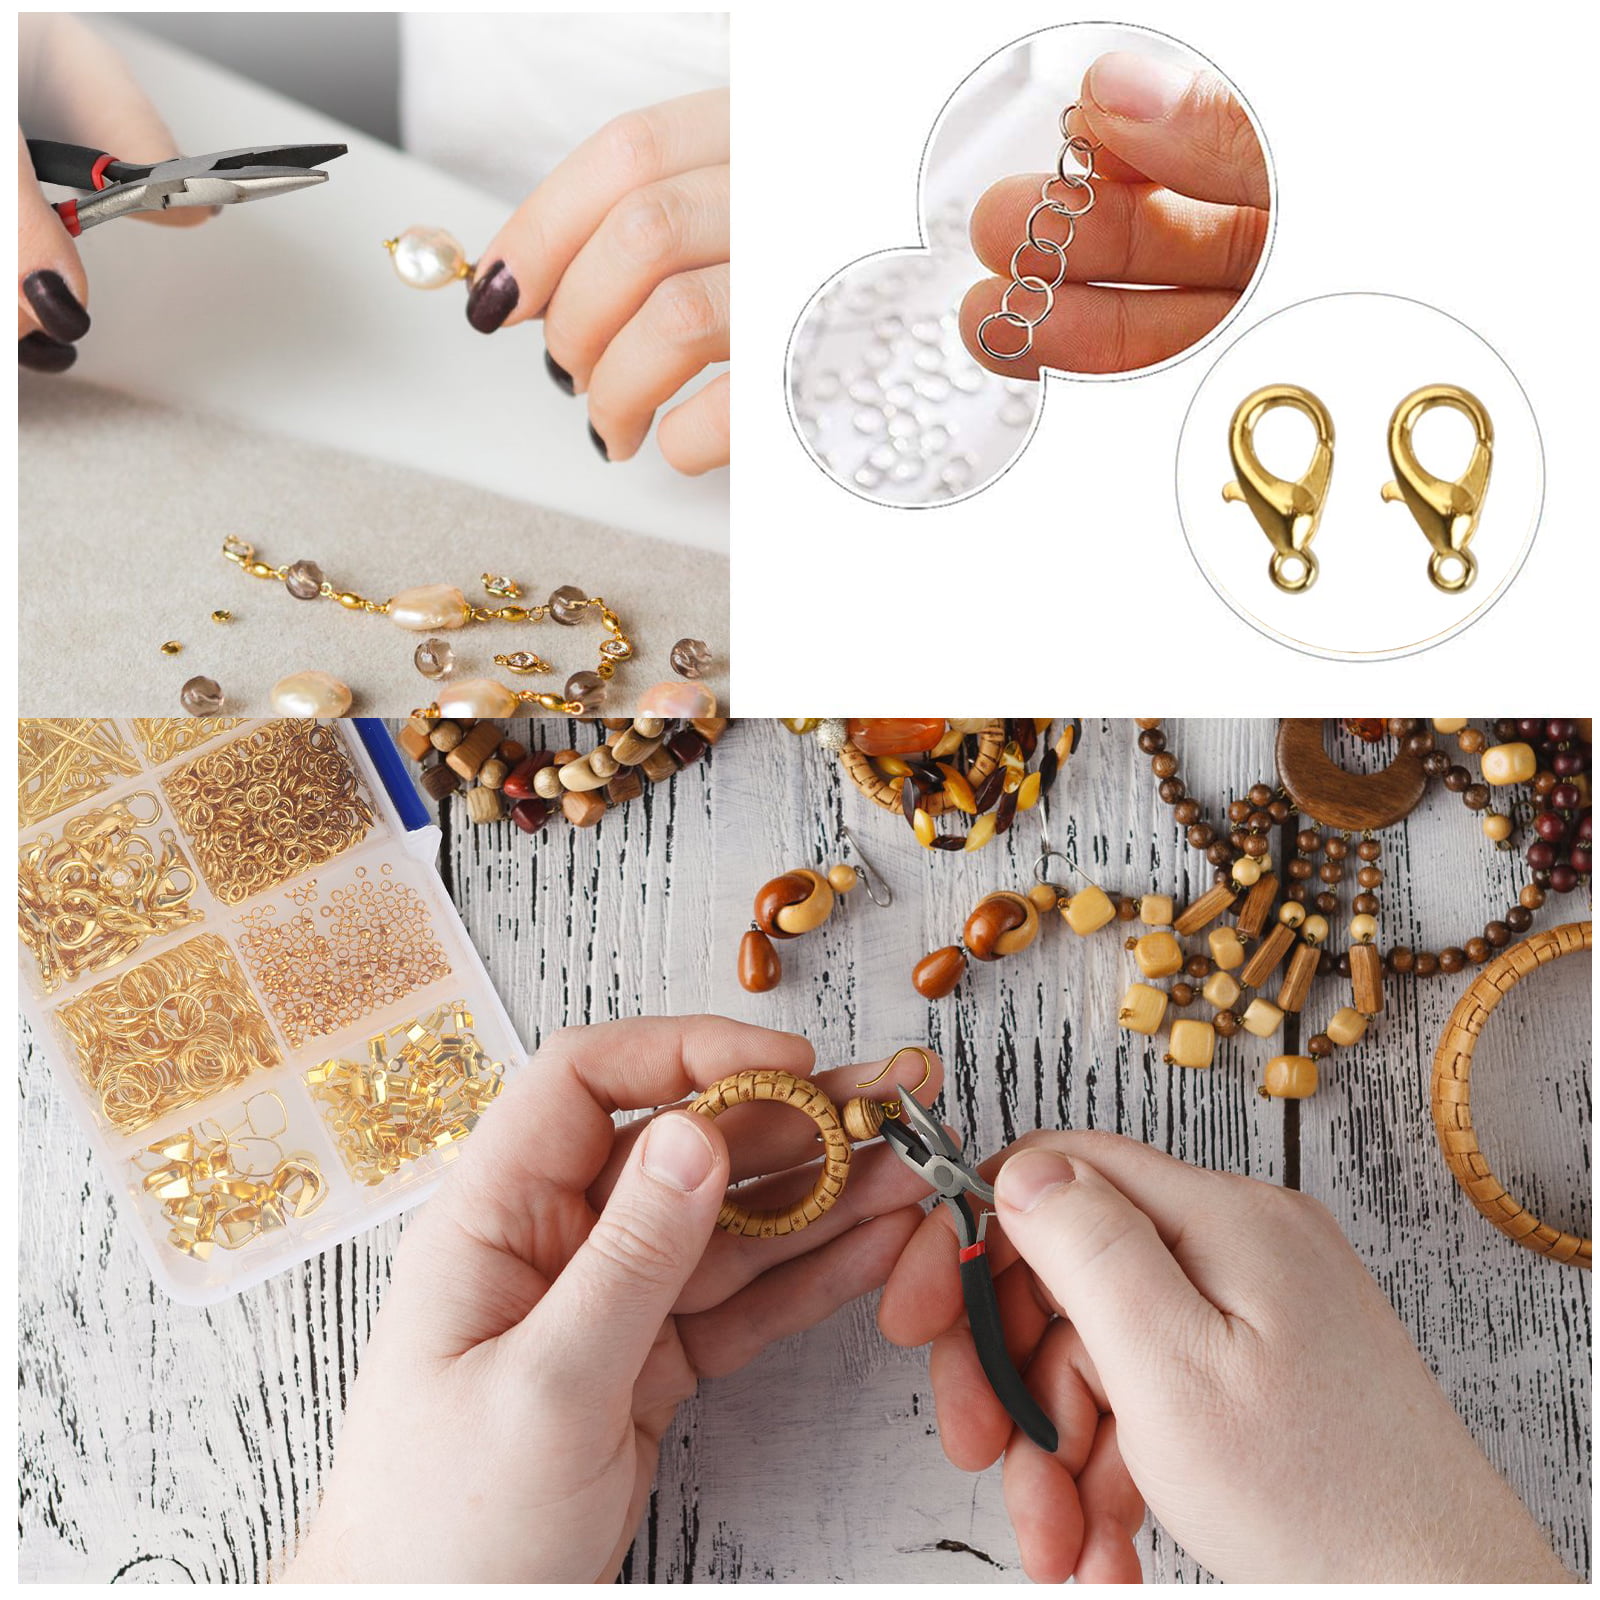 Jewelry Making Kit Jewelry Findings Starter Kit, TSV 905pcs Gold Jewelry Beading Repair Tools Kit for Necklace Making, Including Lobster Clasps